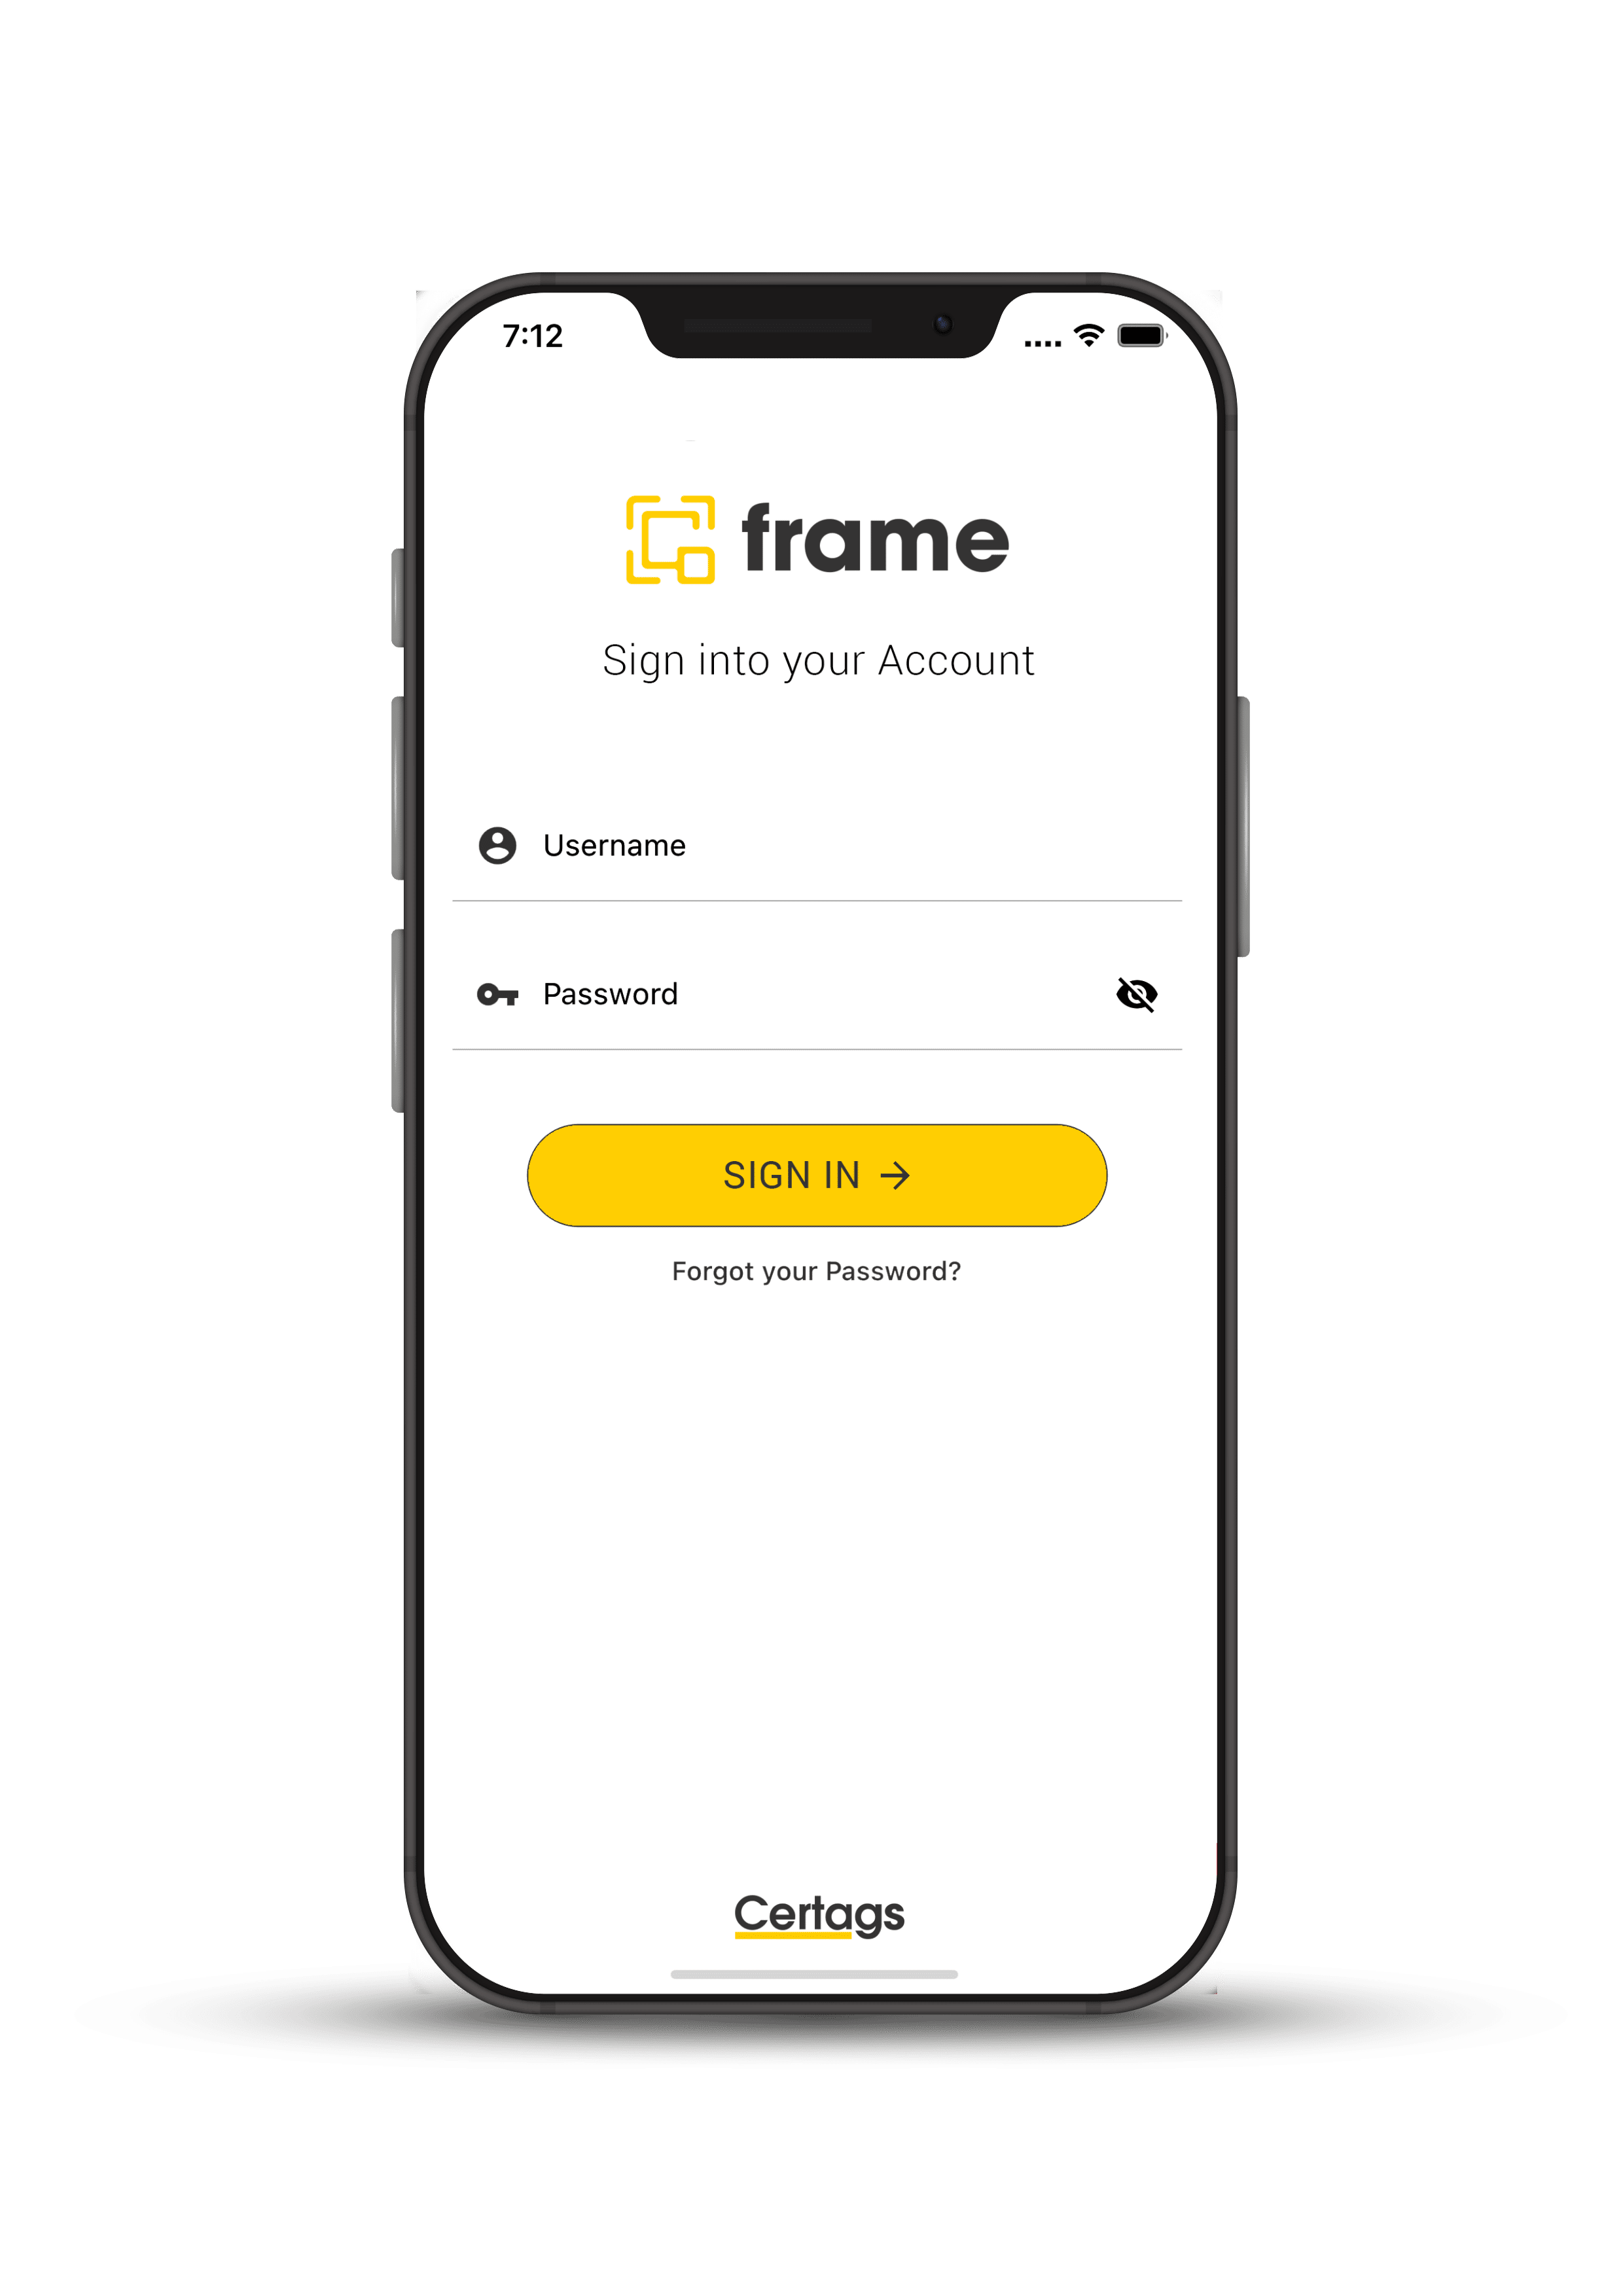 Frame mobile account sign up and sign in